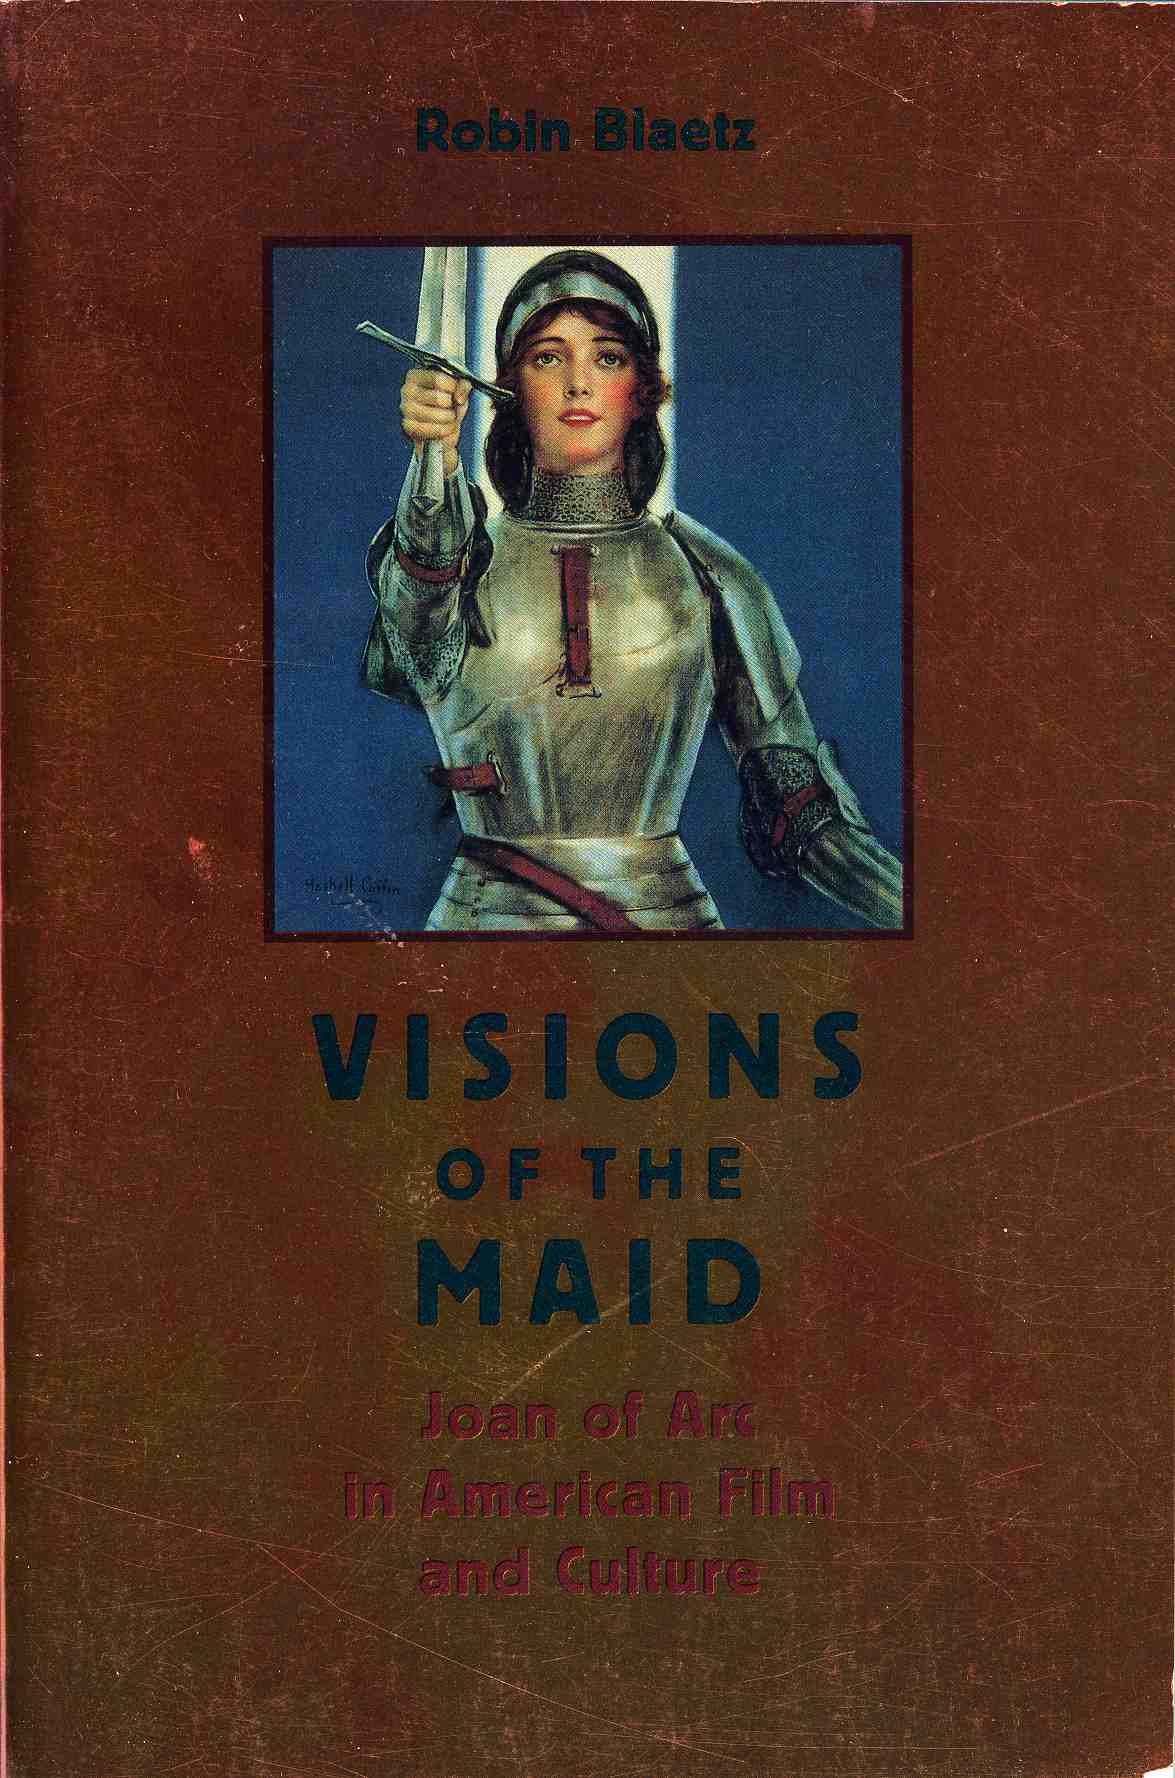 Visions of the Maid